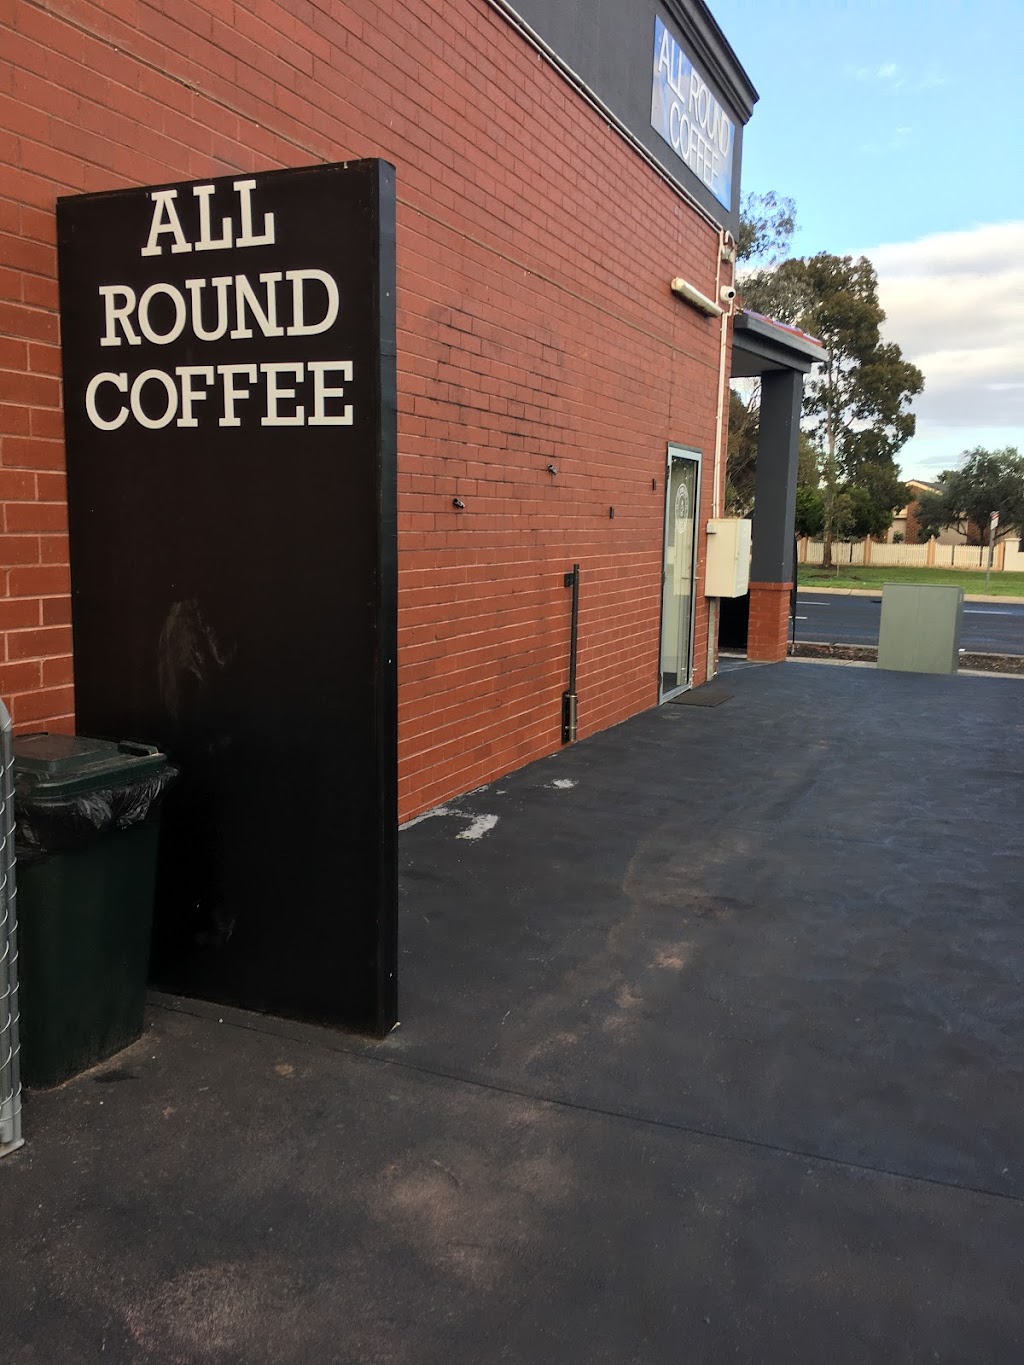 All Round Coffee | cafe | Unit 40D, 316 -340 Childs Rd, Mill Park VIC 3082, Australia | 0484189549 OR +61 484 189 549